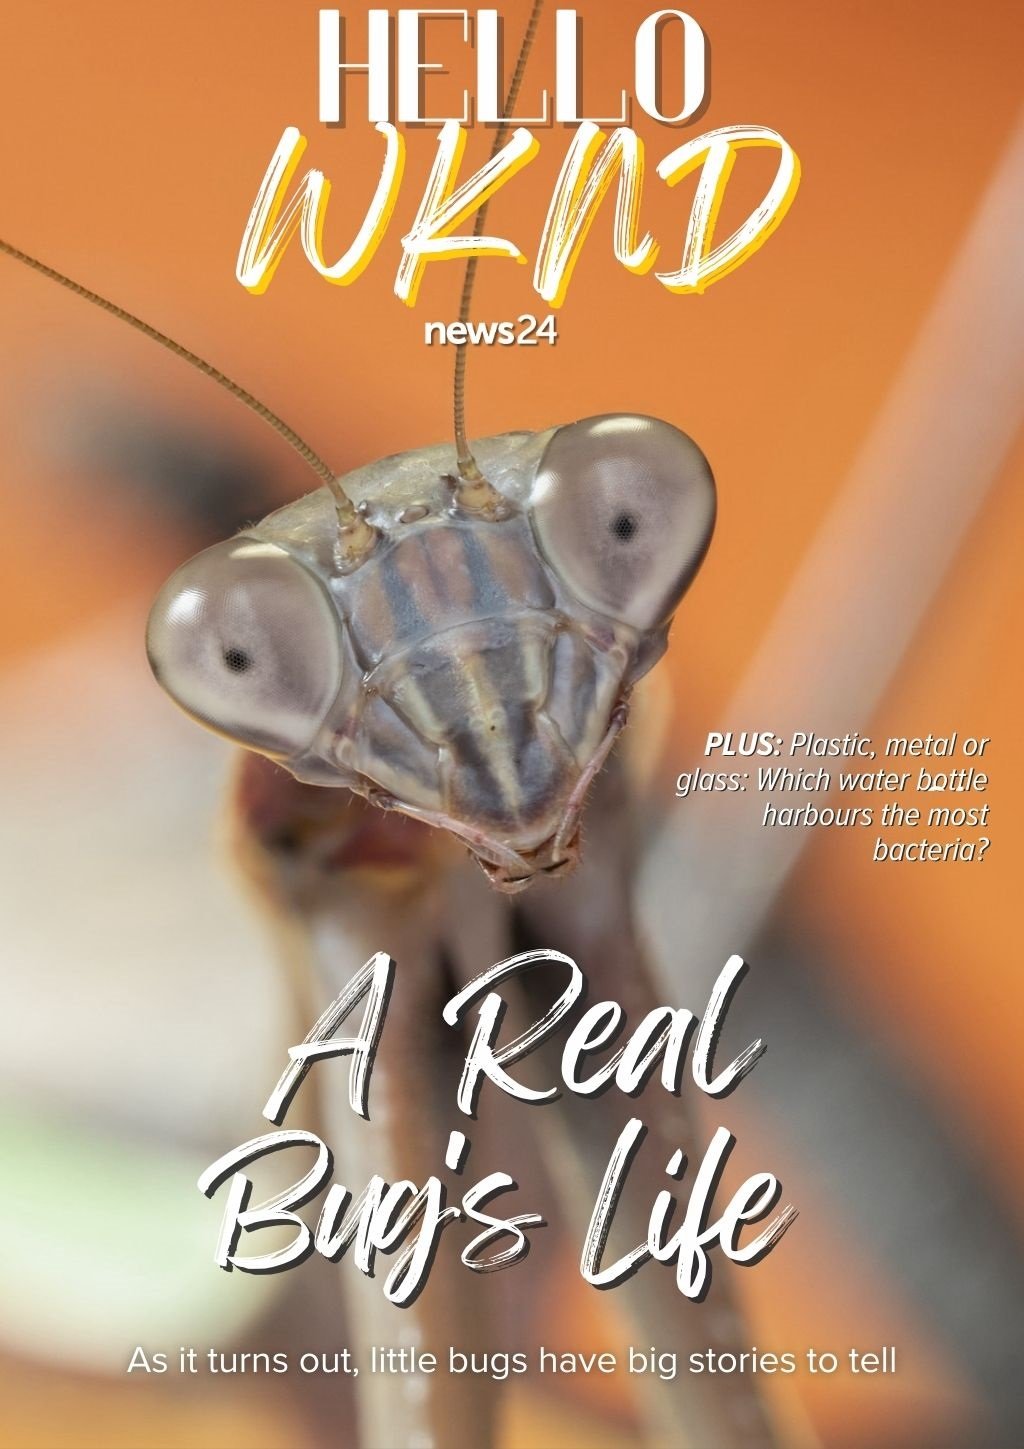 HELLO WEEKEND | Enter the miniature scale world of bugs and learn all about their adventures in A Real Bug’s Life | Life